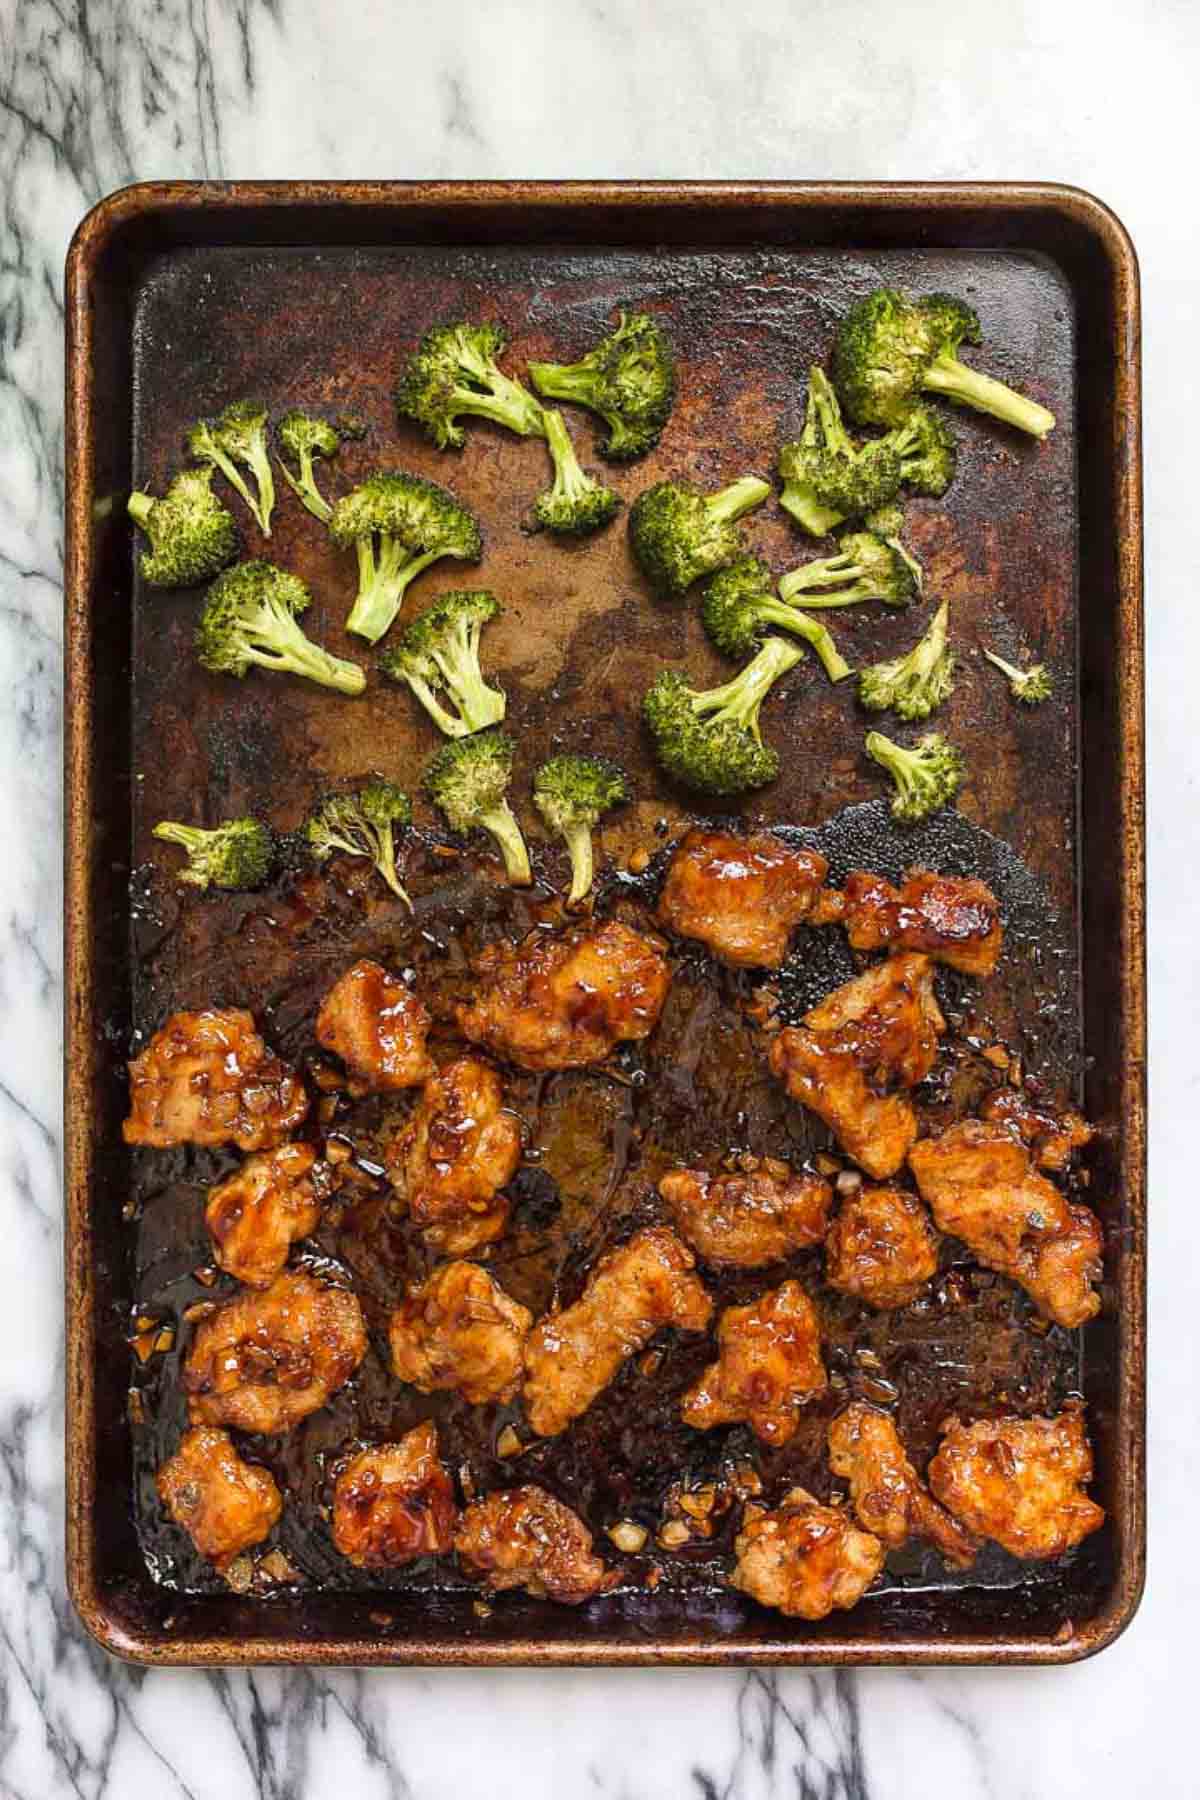 Dark metal sheet pan with honey garlic chicken thighs pieces and broccoli after cooking.